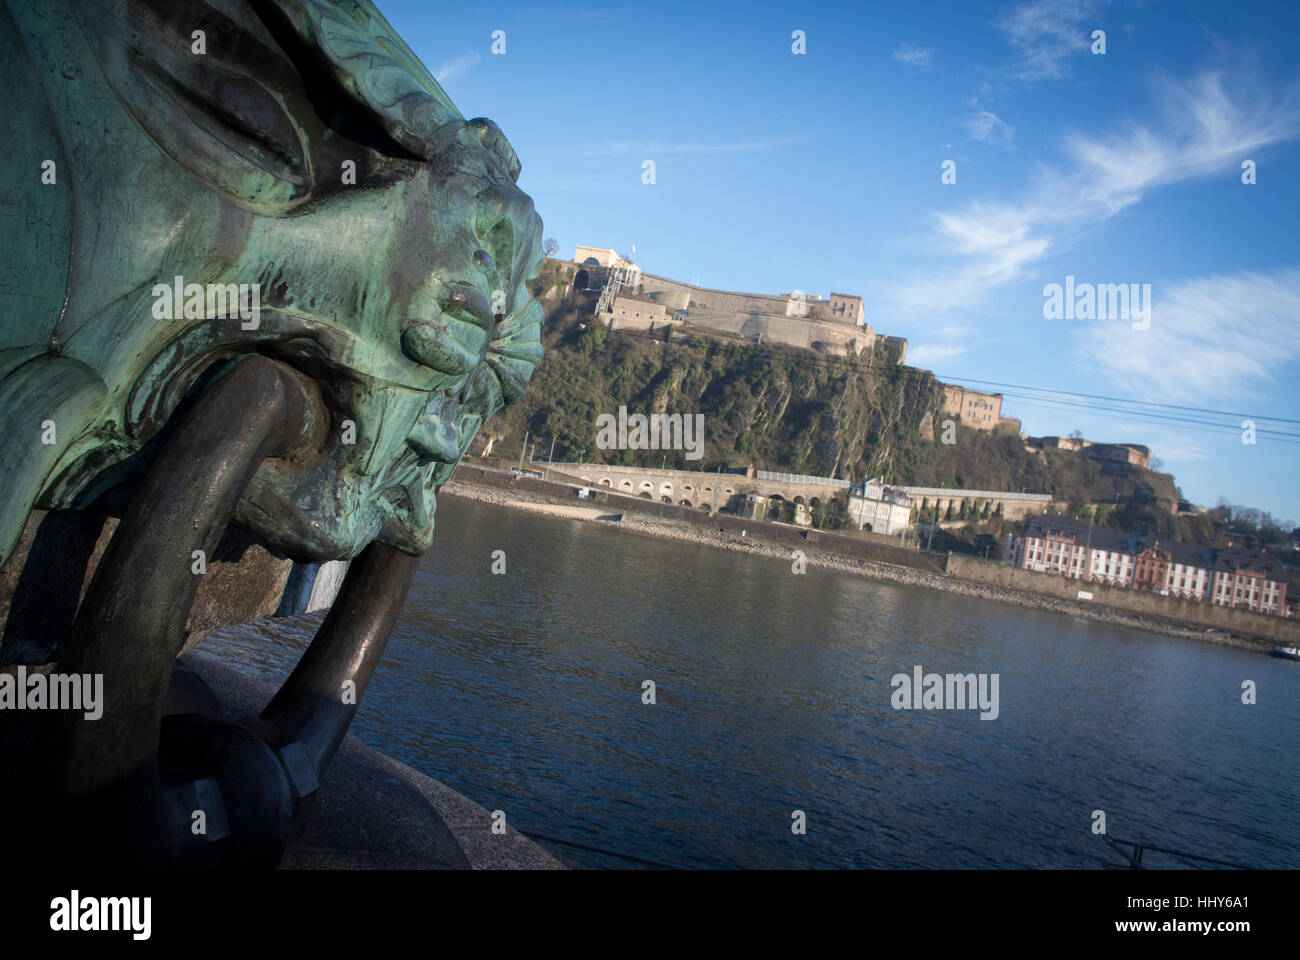 A mooring for boats st the Deutsches Eke with the Ehrenbreitstein Fortress in the background Koblenz, Germany. Stock Photo